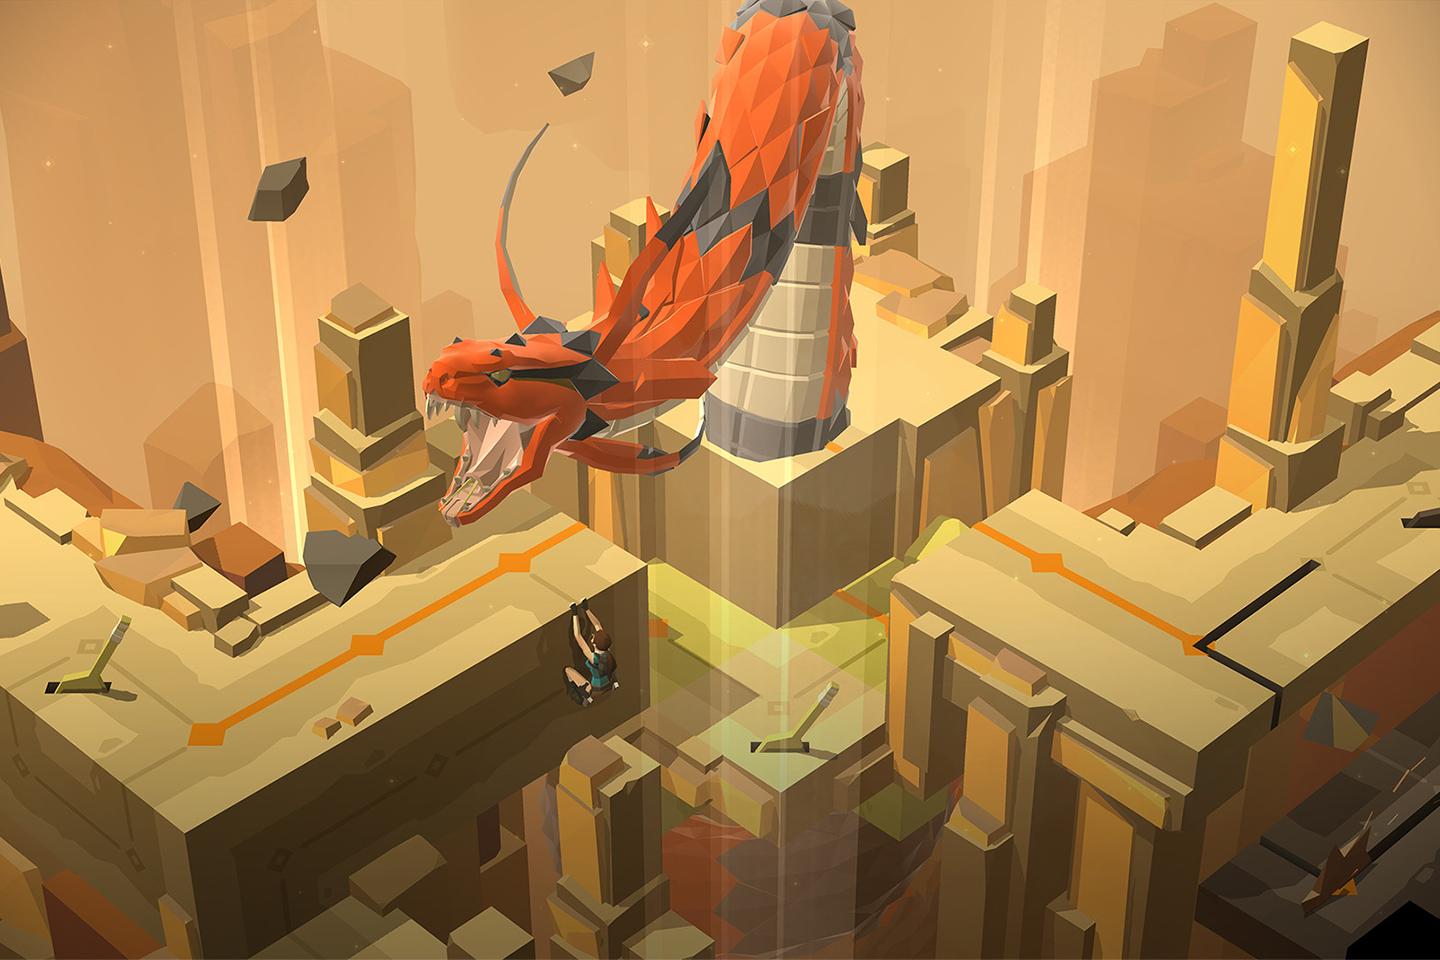 A dynamic game image capturing a character evading a fiery dragon’s breath amid crumbling ruins and a backdrop of towering golden pillars.